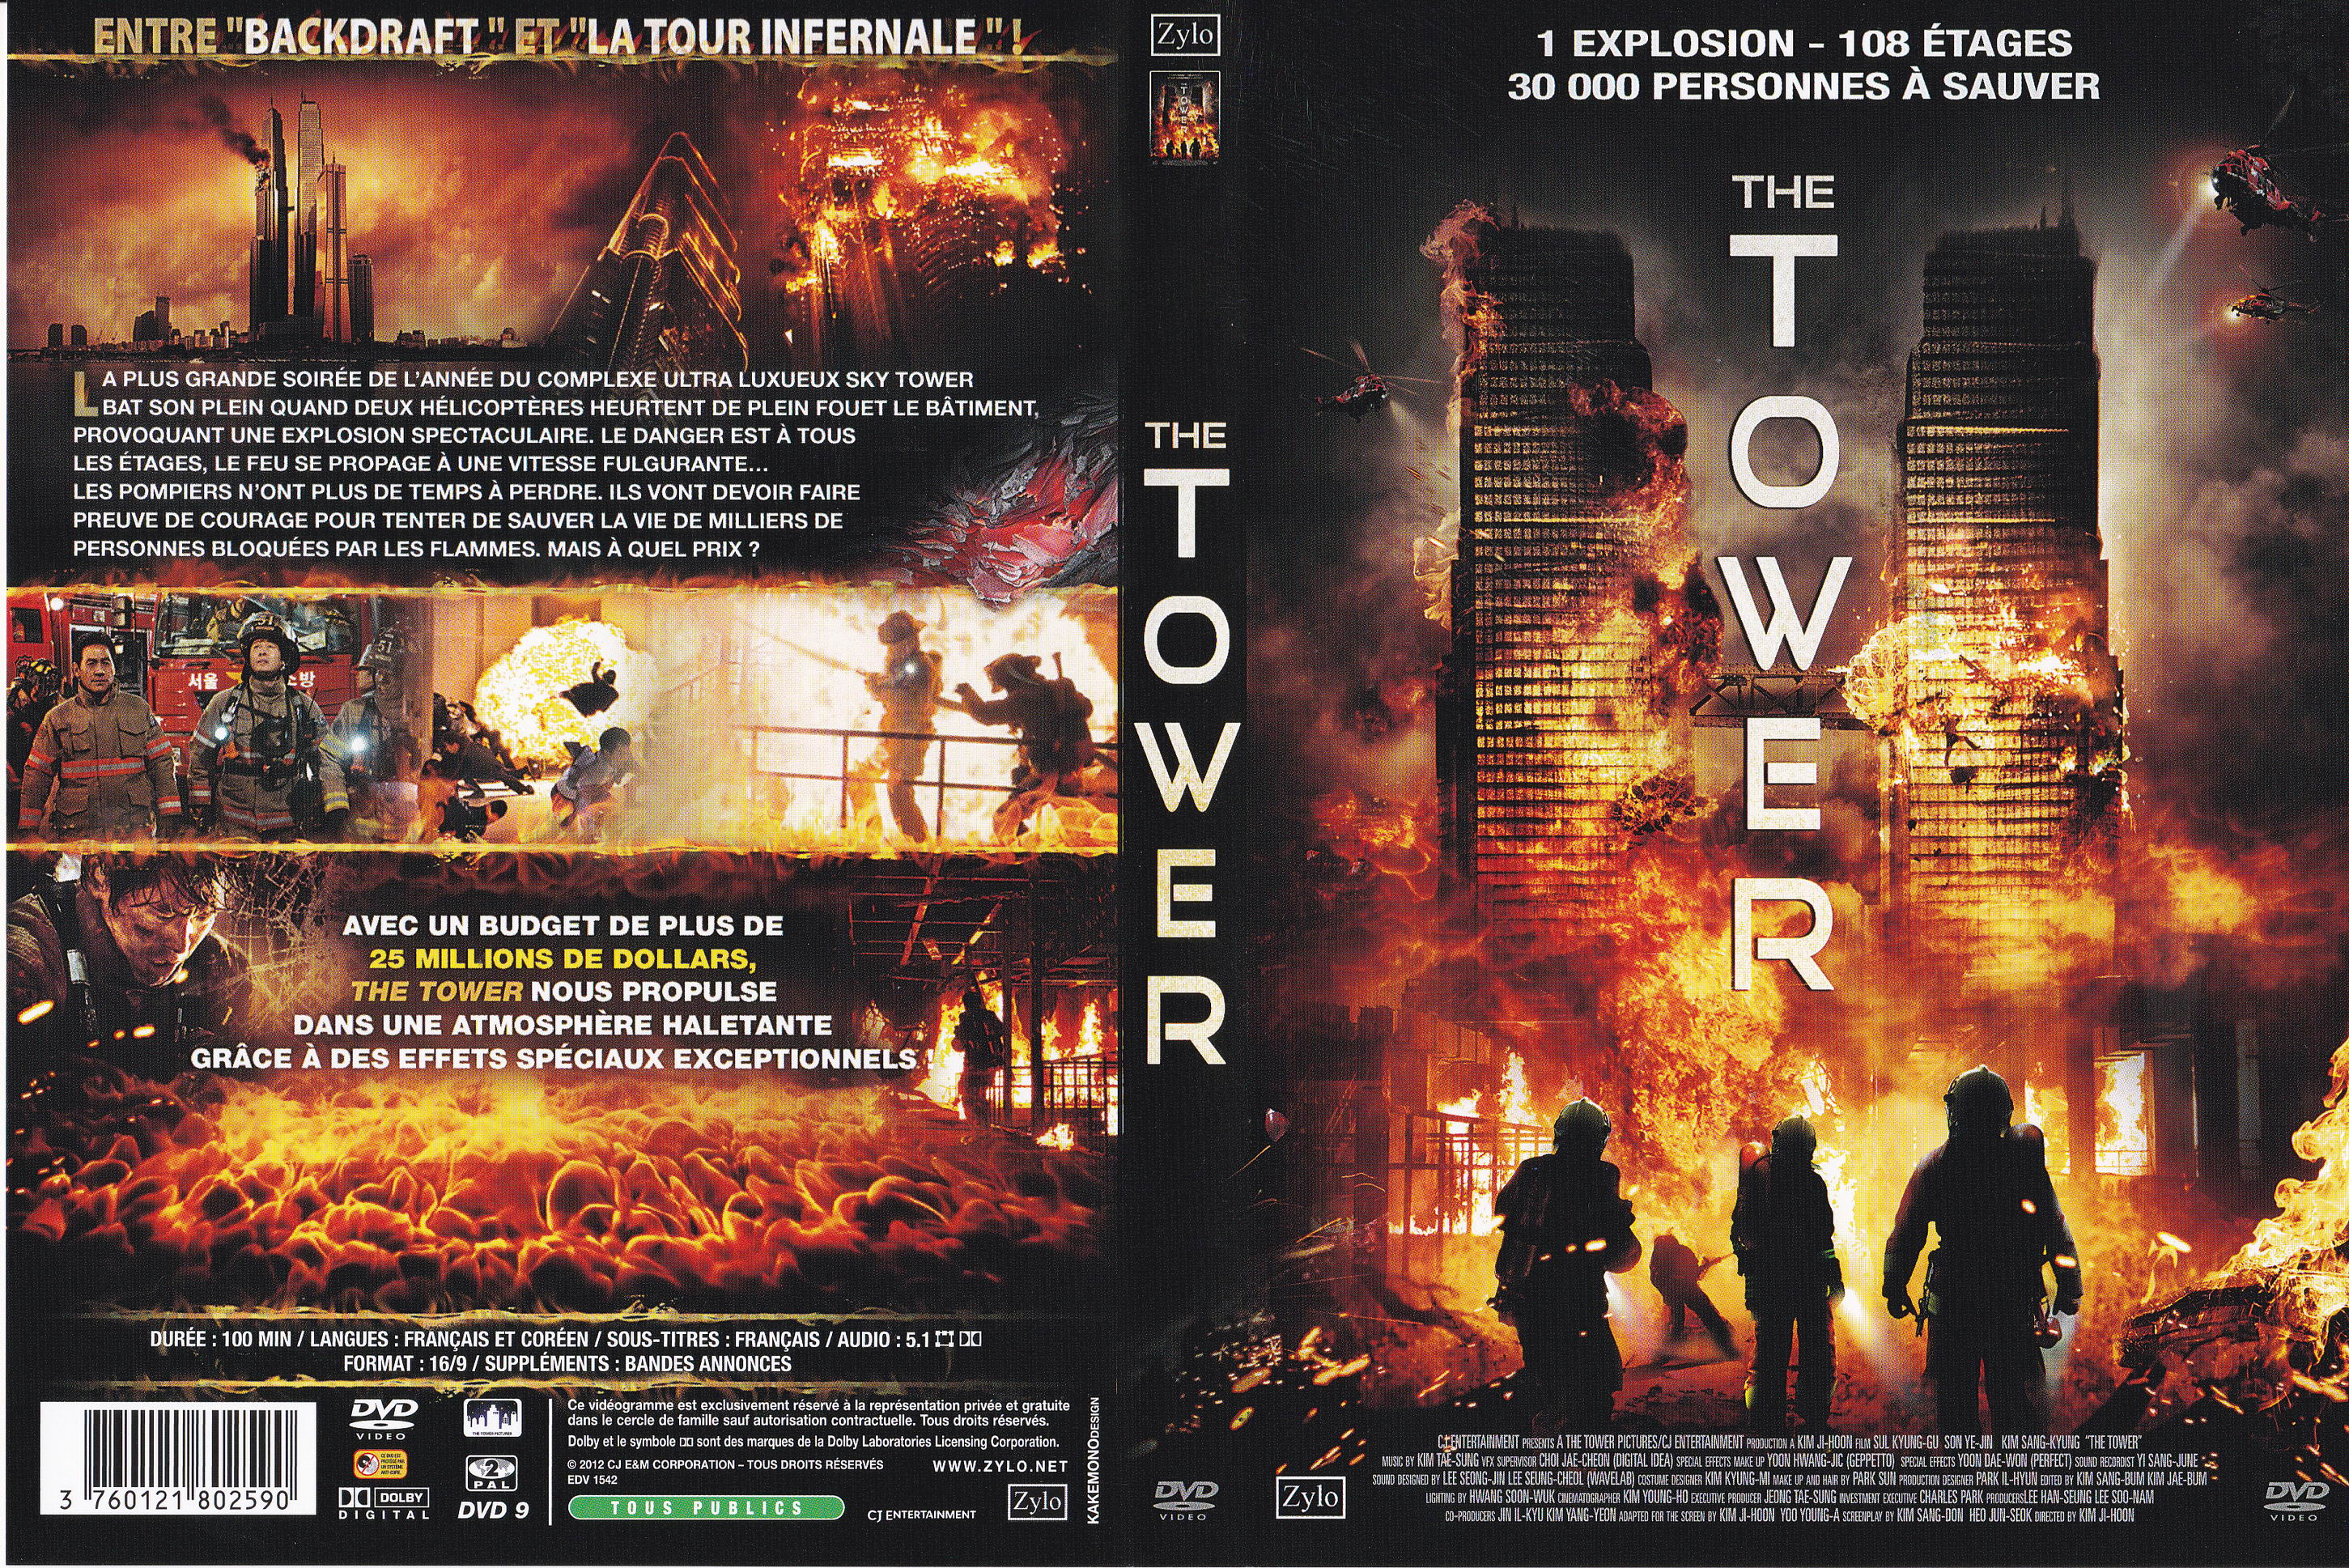 Jaquette DVD The tower